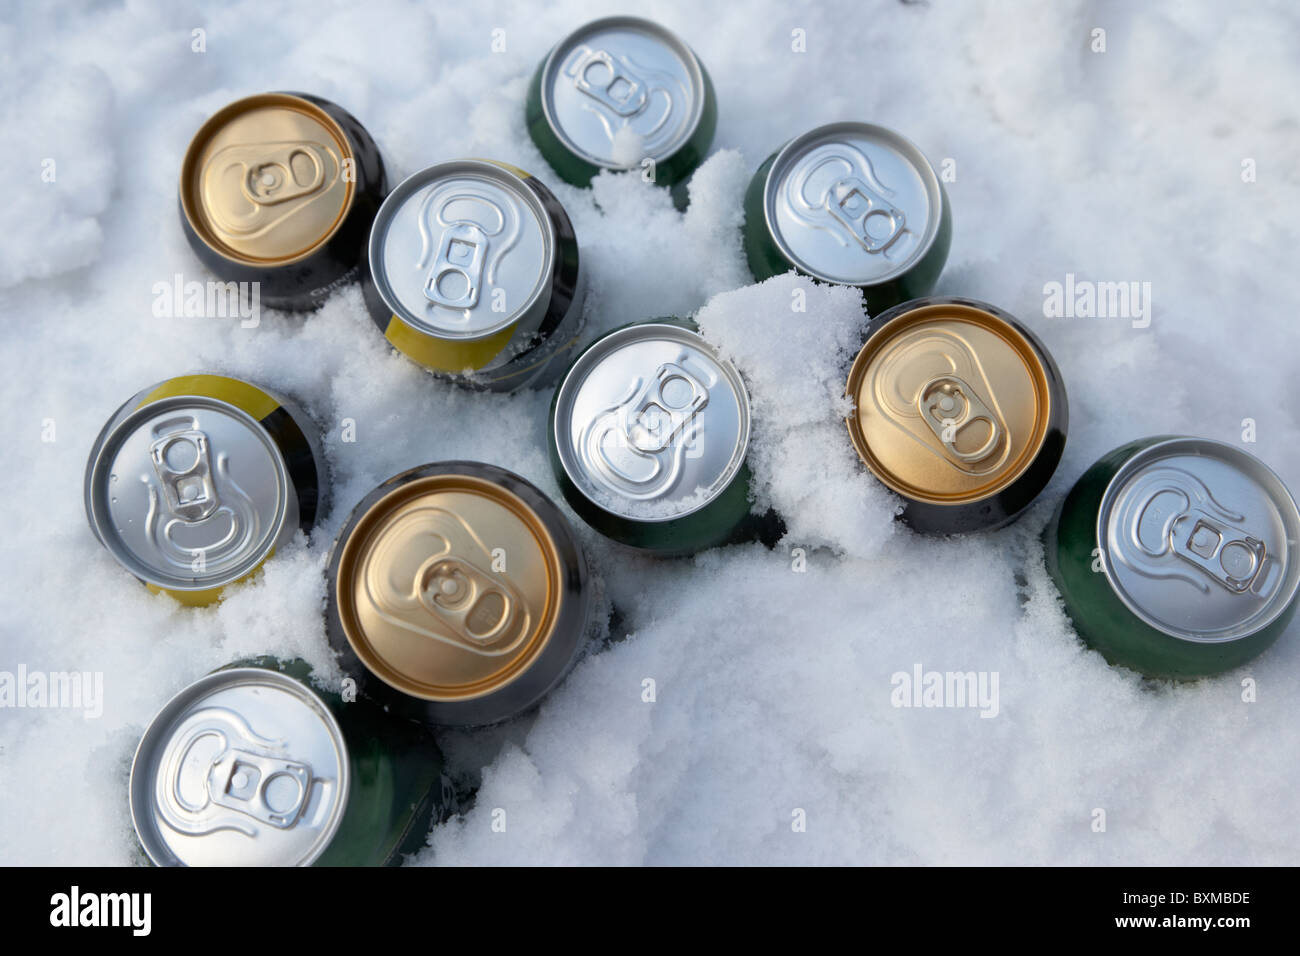 beer and alcohol cans buried in snow to keep them cool outdoors during winter Stock Photo